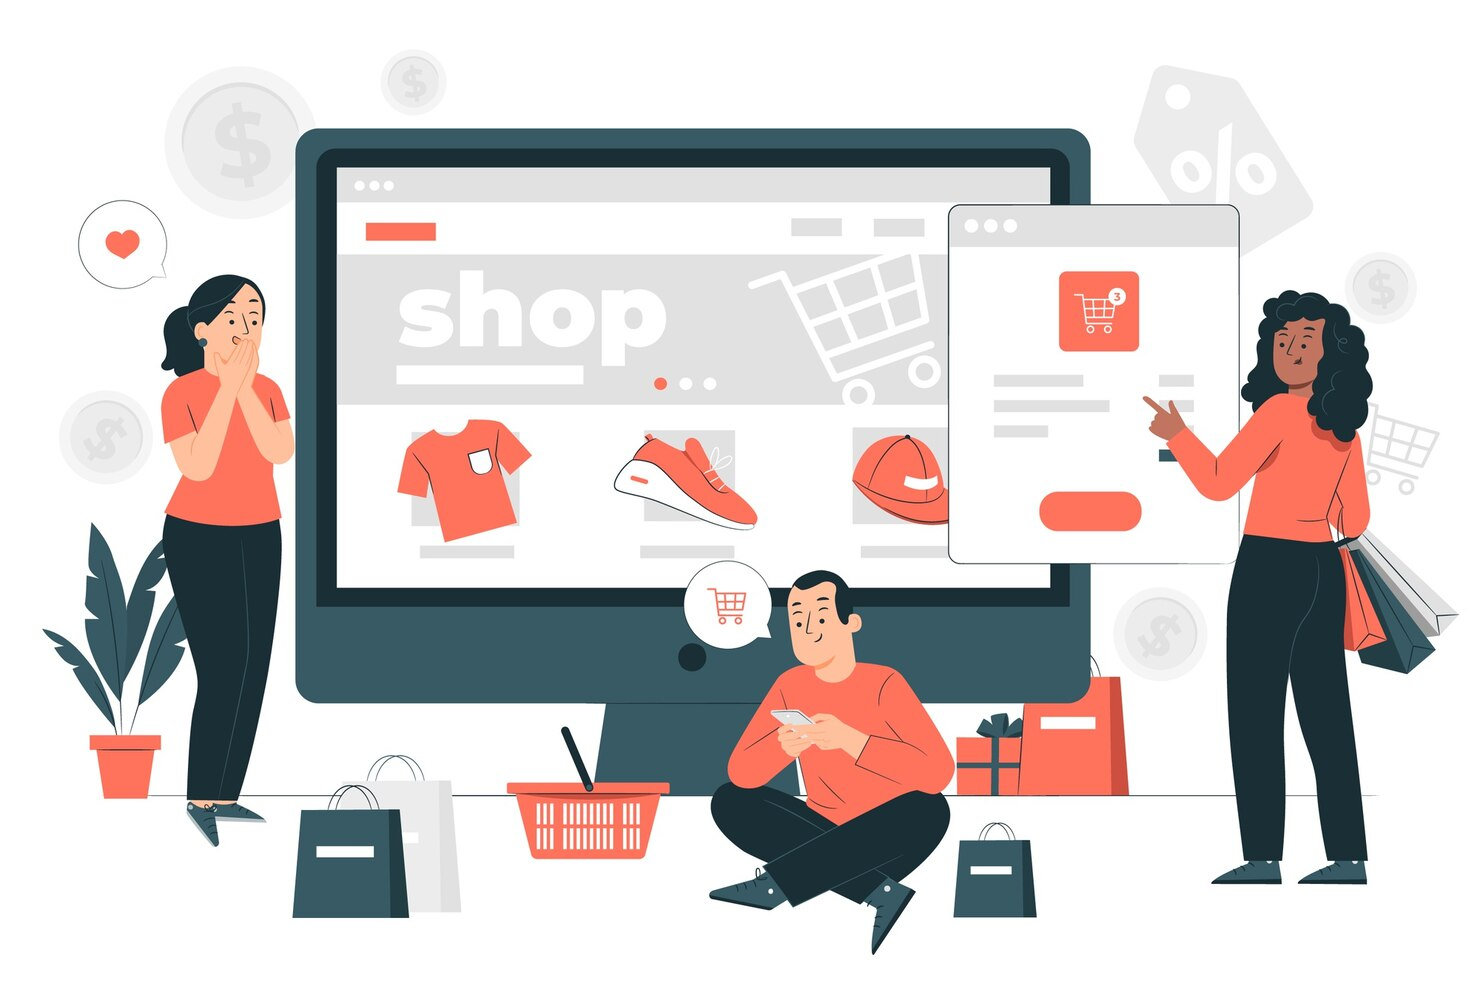 Key features of a B2B ecommerce website